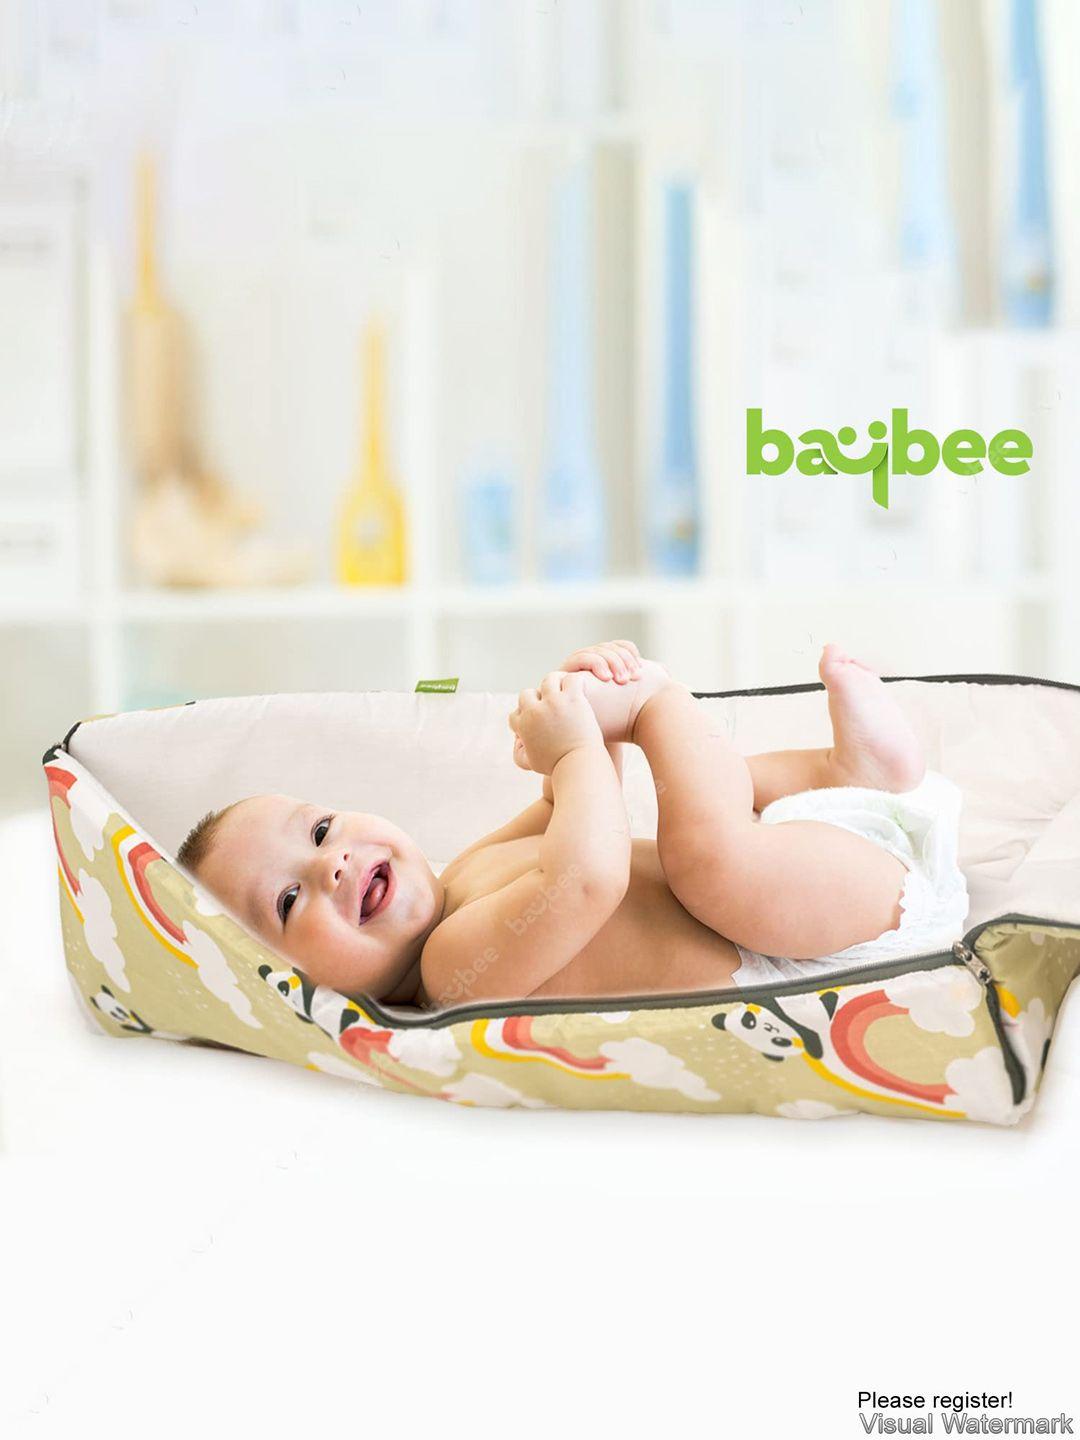 baybee infants printed pure cotton 3 in 1 baby sleeping bed